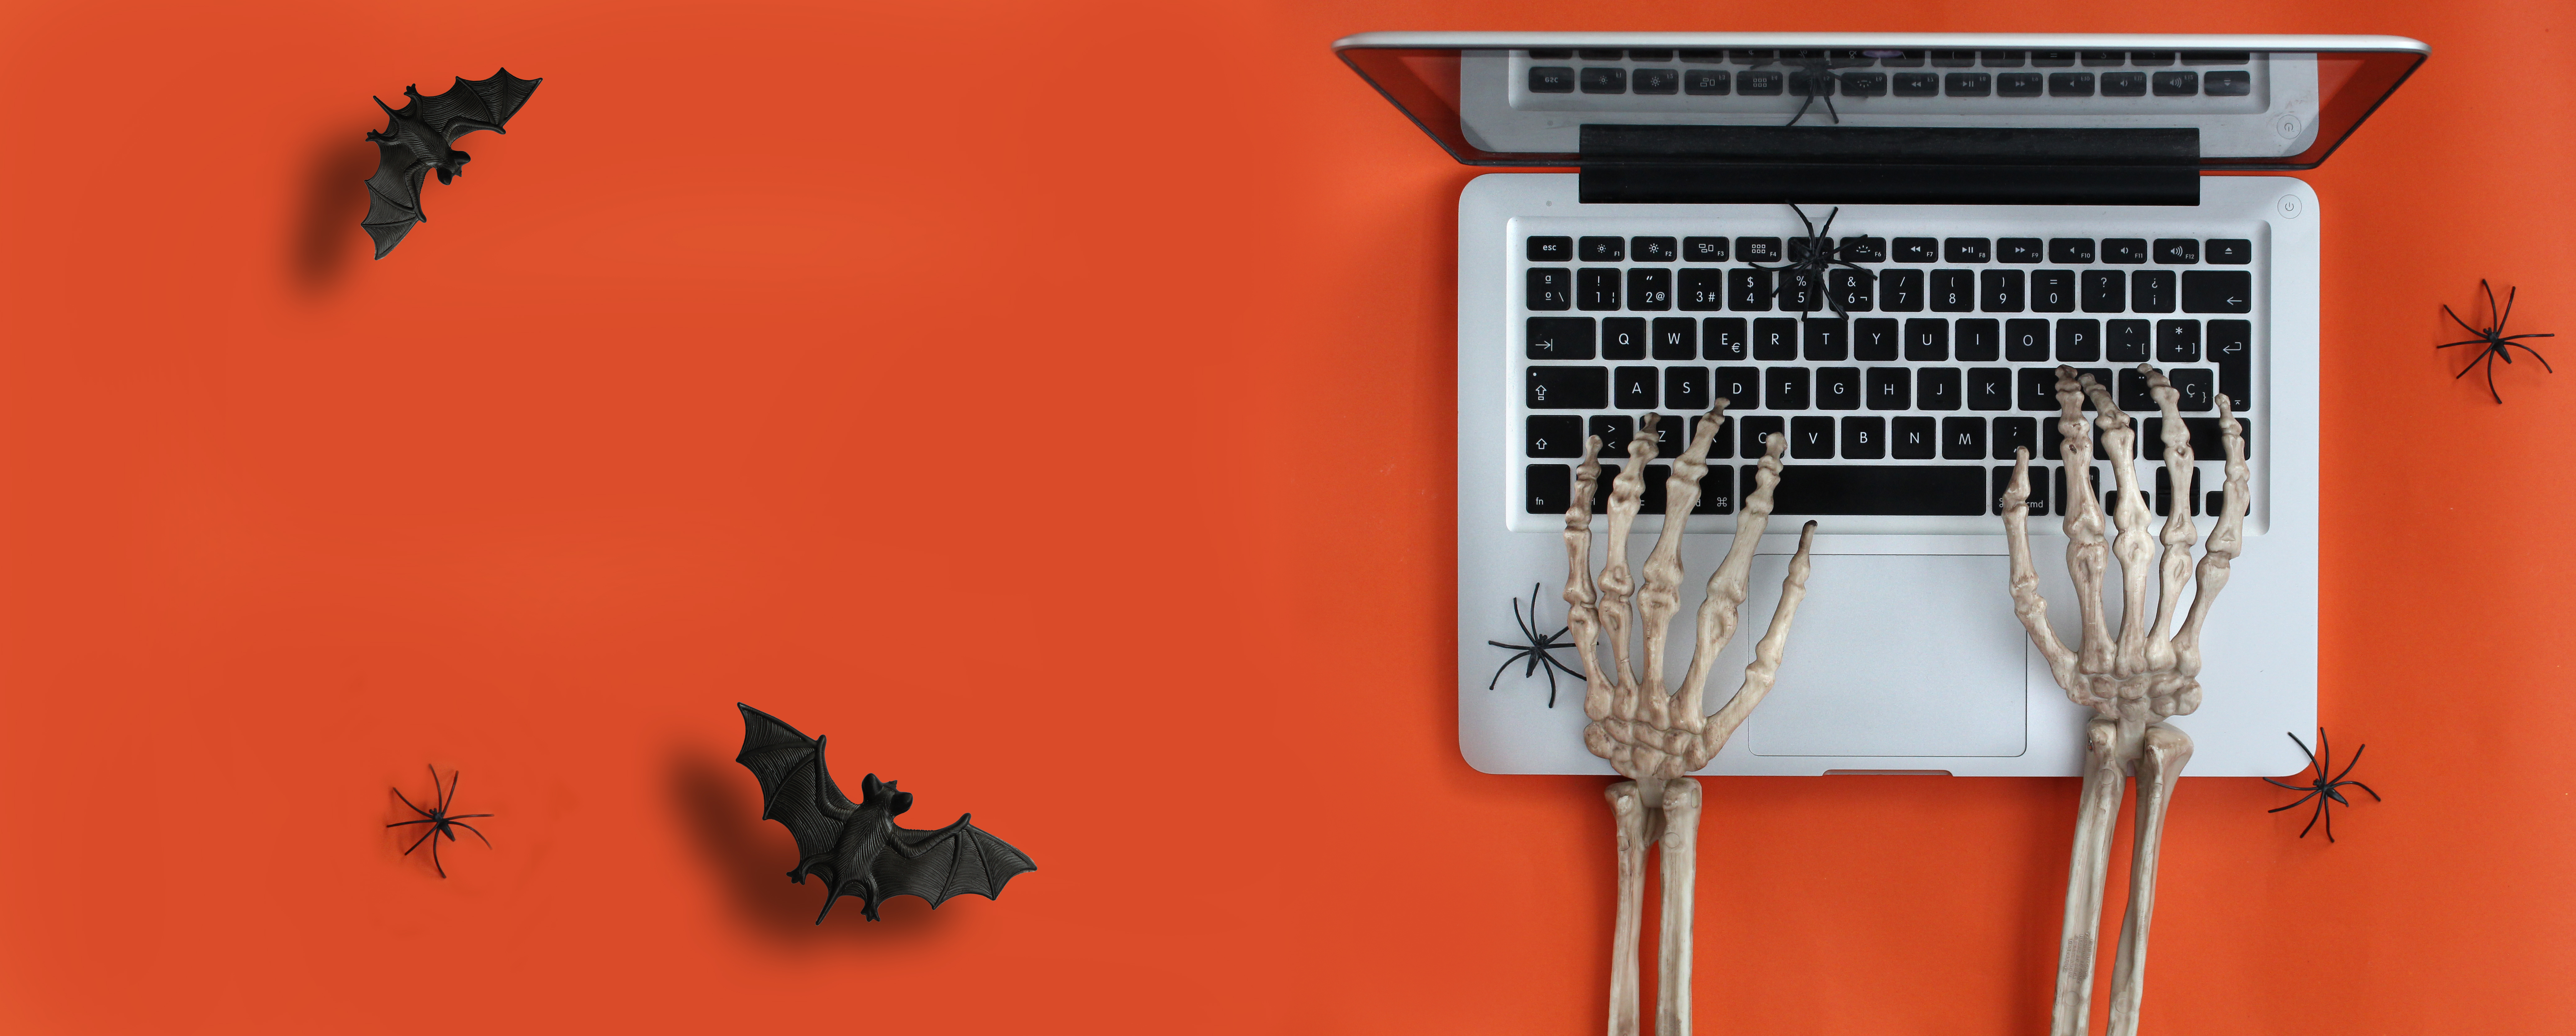 NEXT! Ad Agency discusses digital marketing mistakes this Halloween.